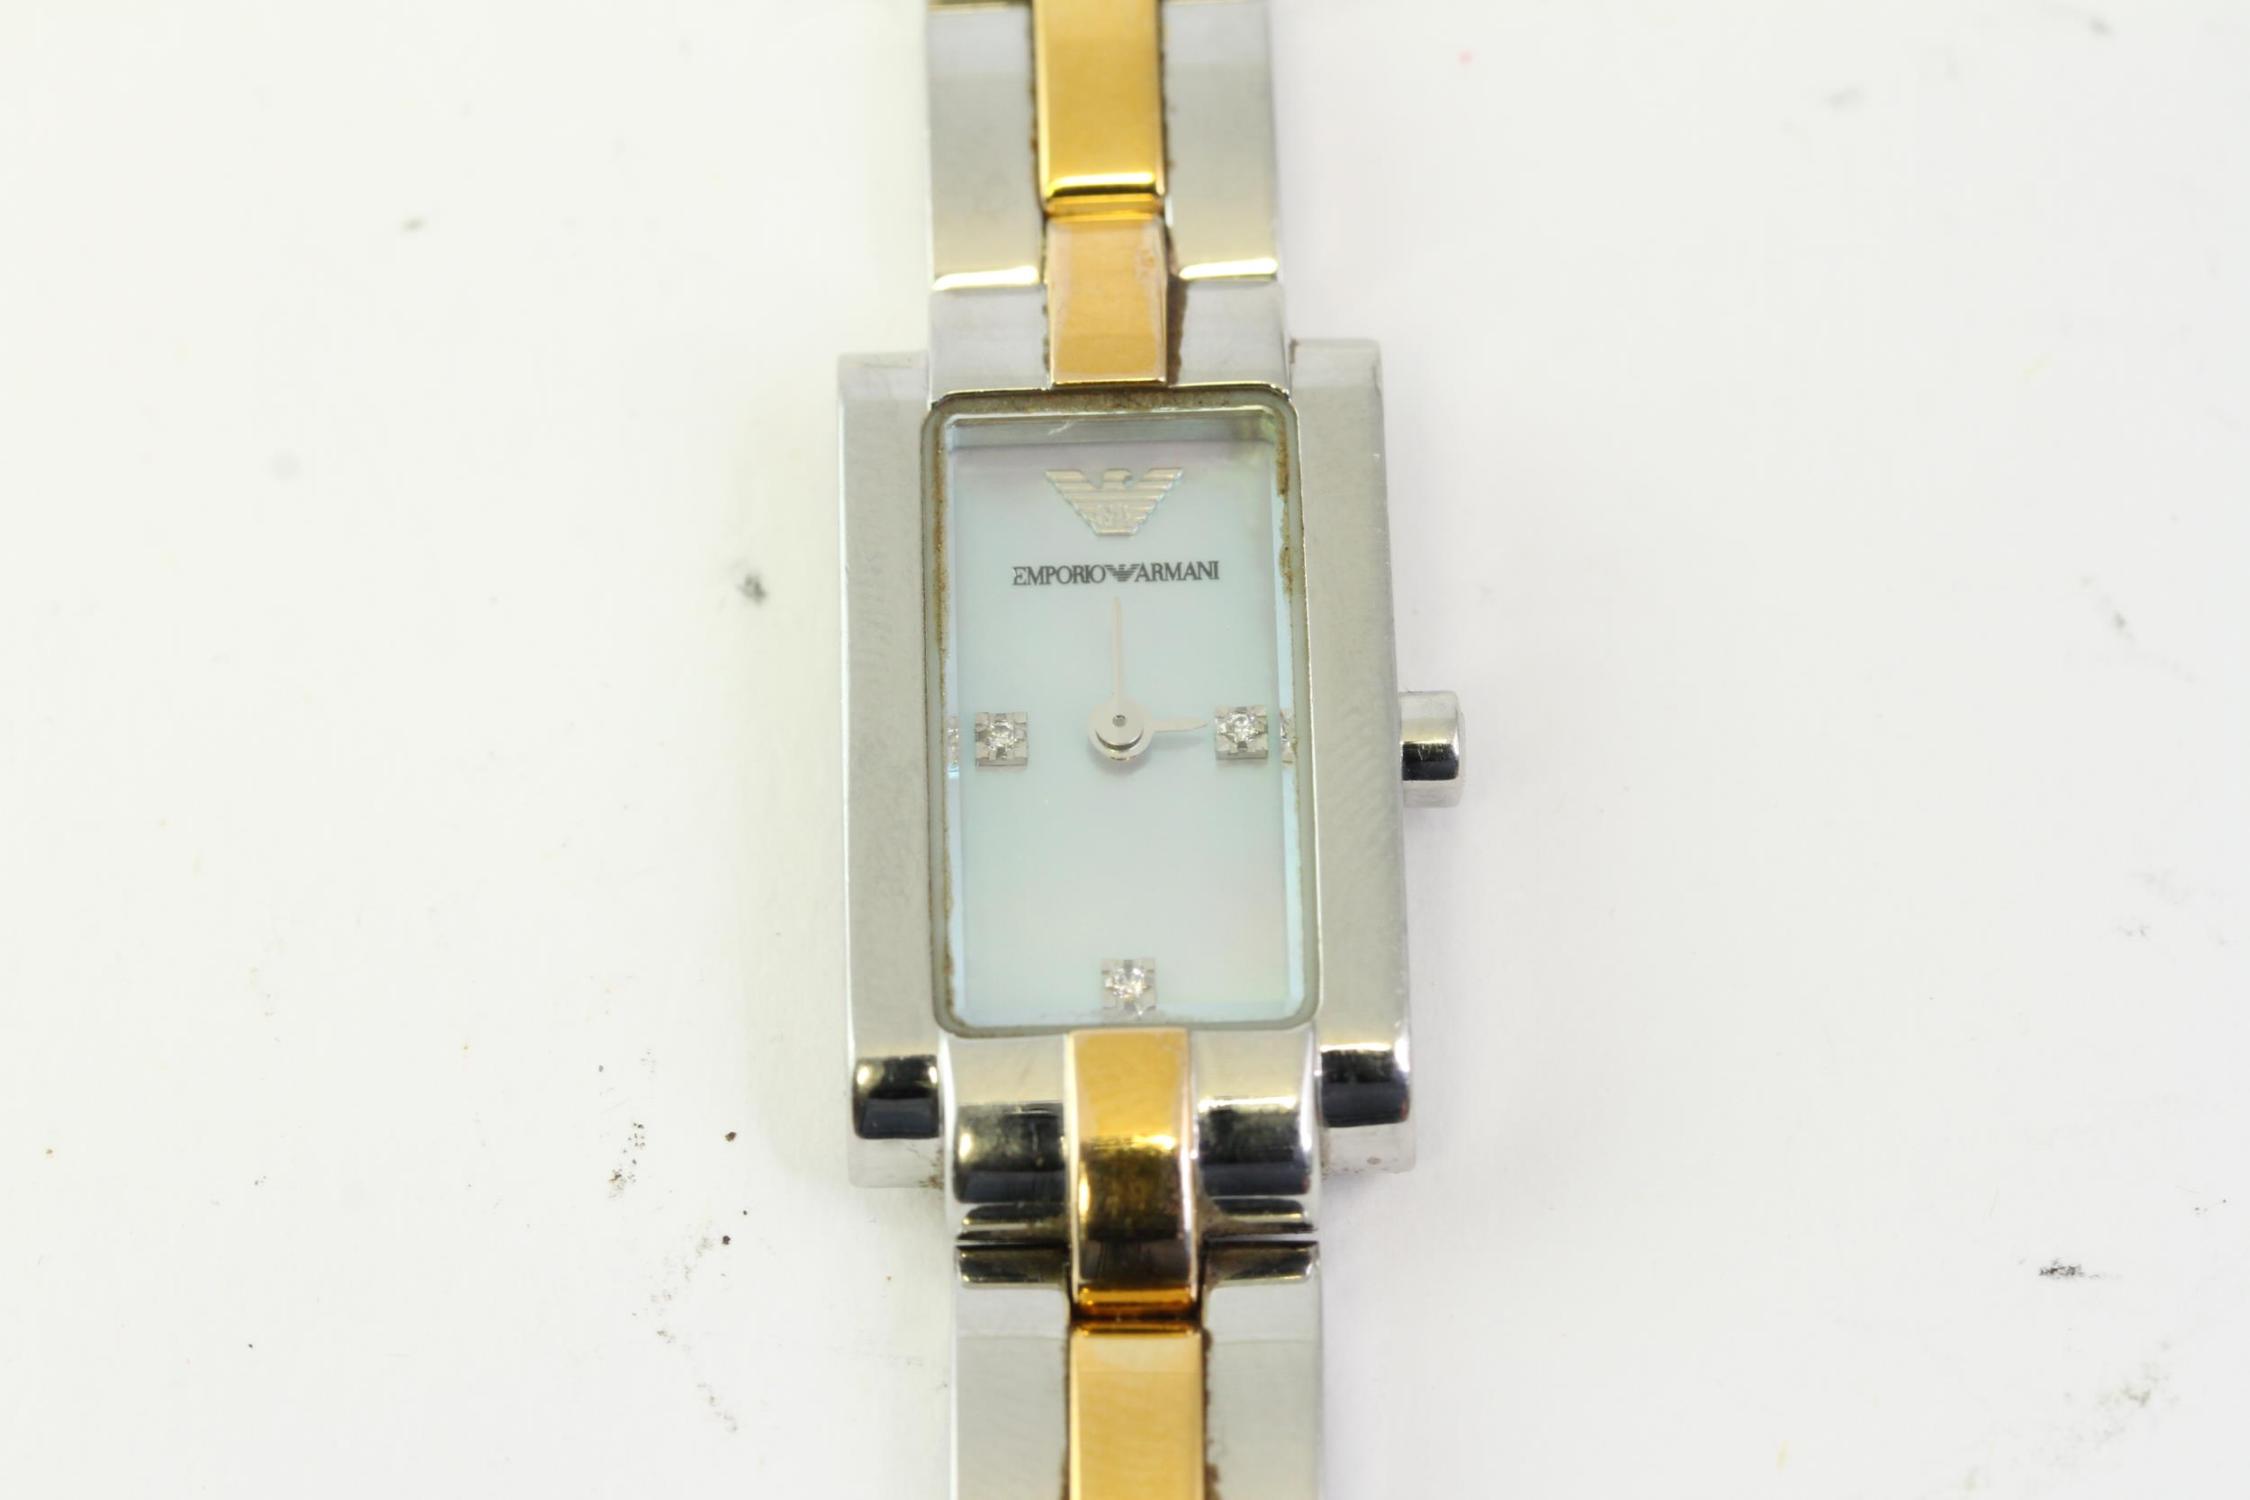 LADIES EMPORIO ARMANI MOTHER OF PEARL QUARTZ WATCH, rectangular mother of pearl dial with - Image 2 of 3